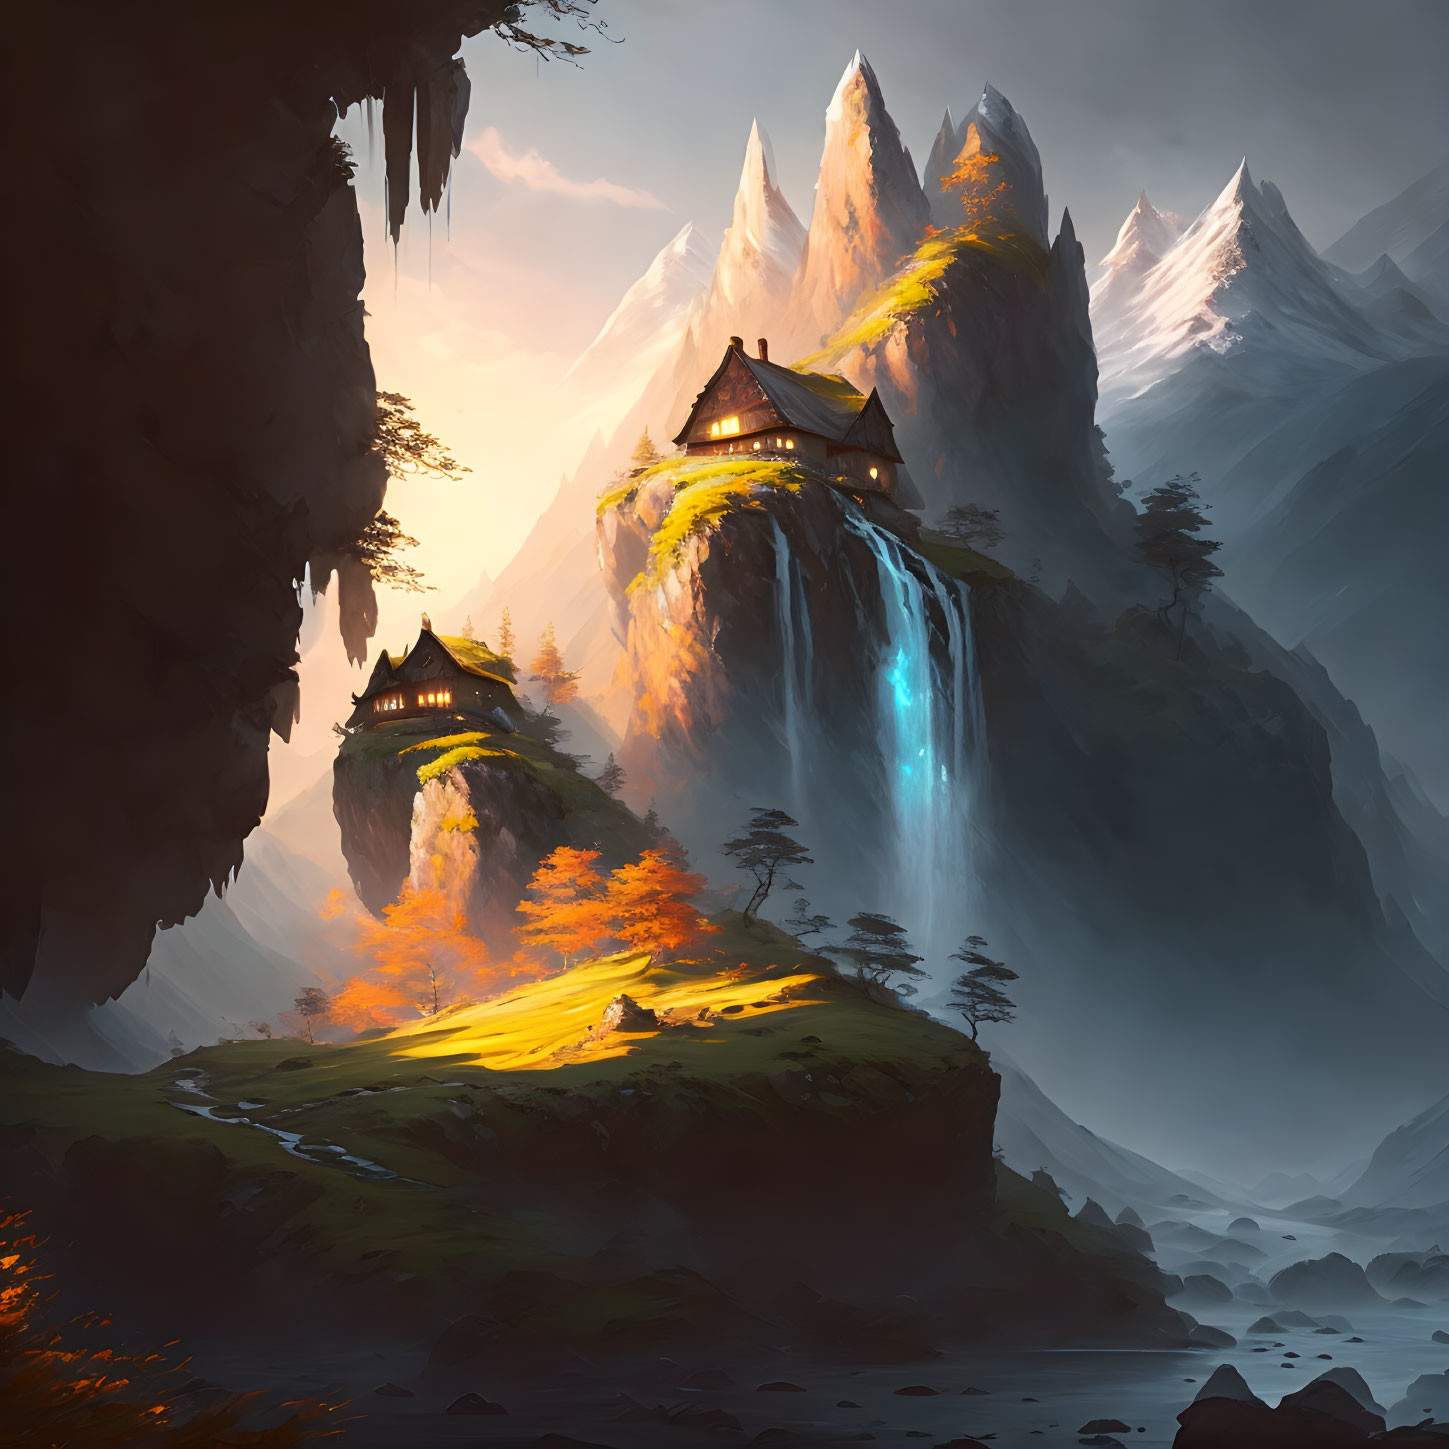 Fantasy landscape with cliff houses, waterfalls, autumn trees, warm sunset, mountains, and mist